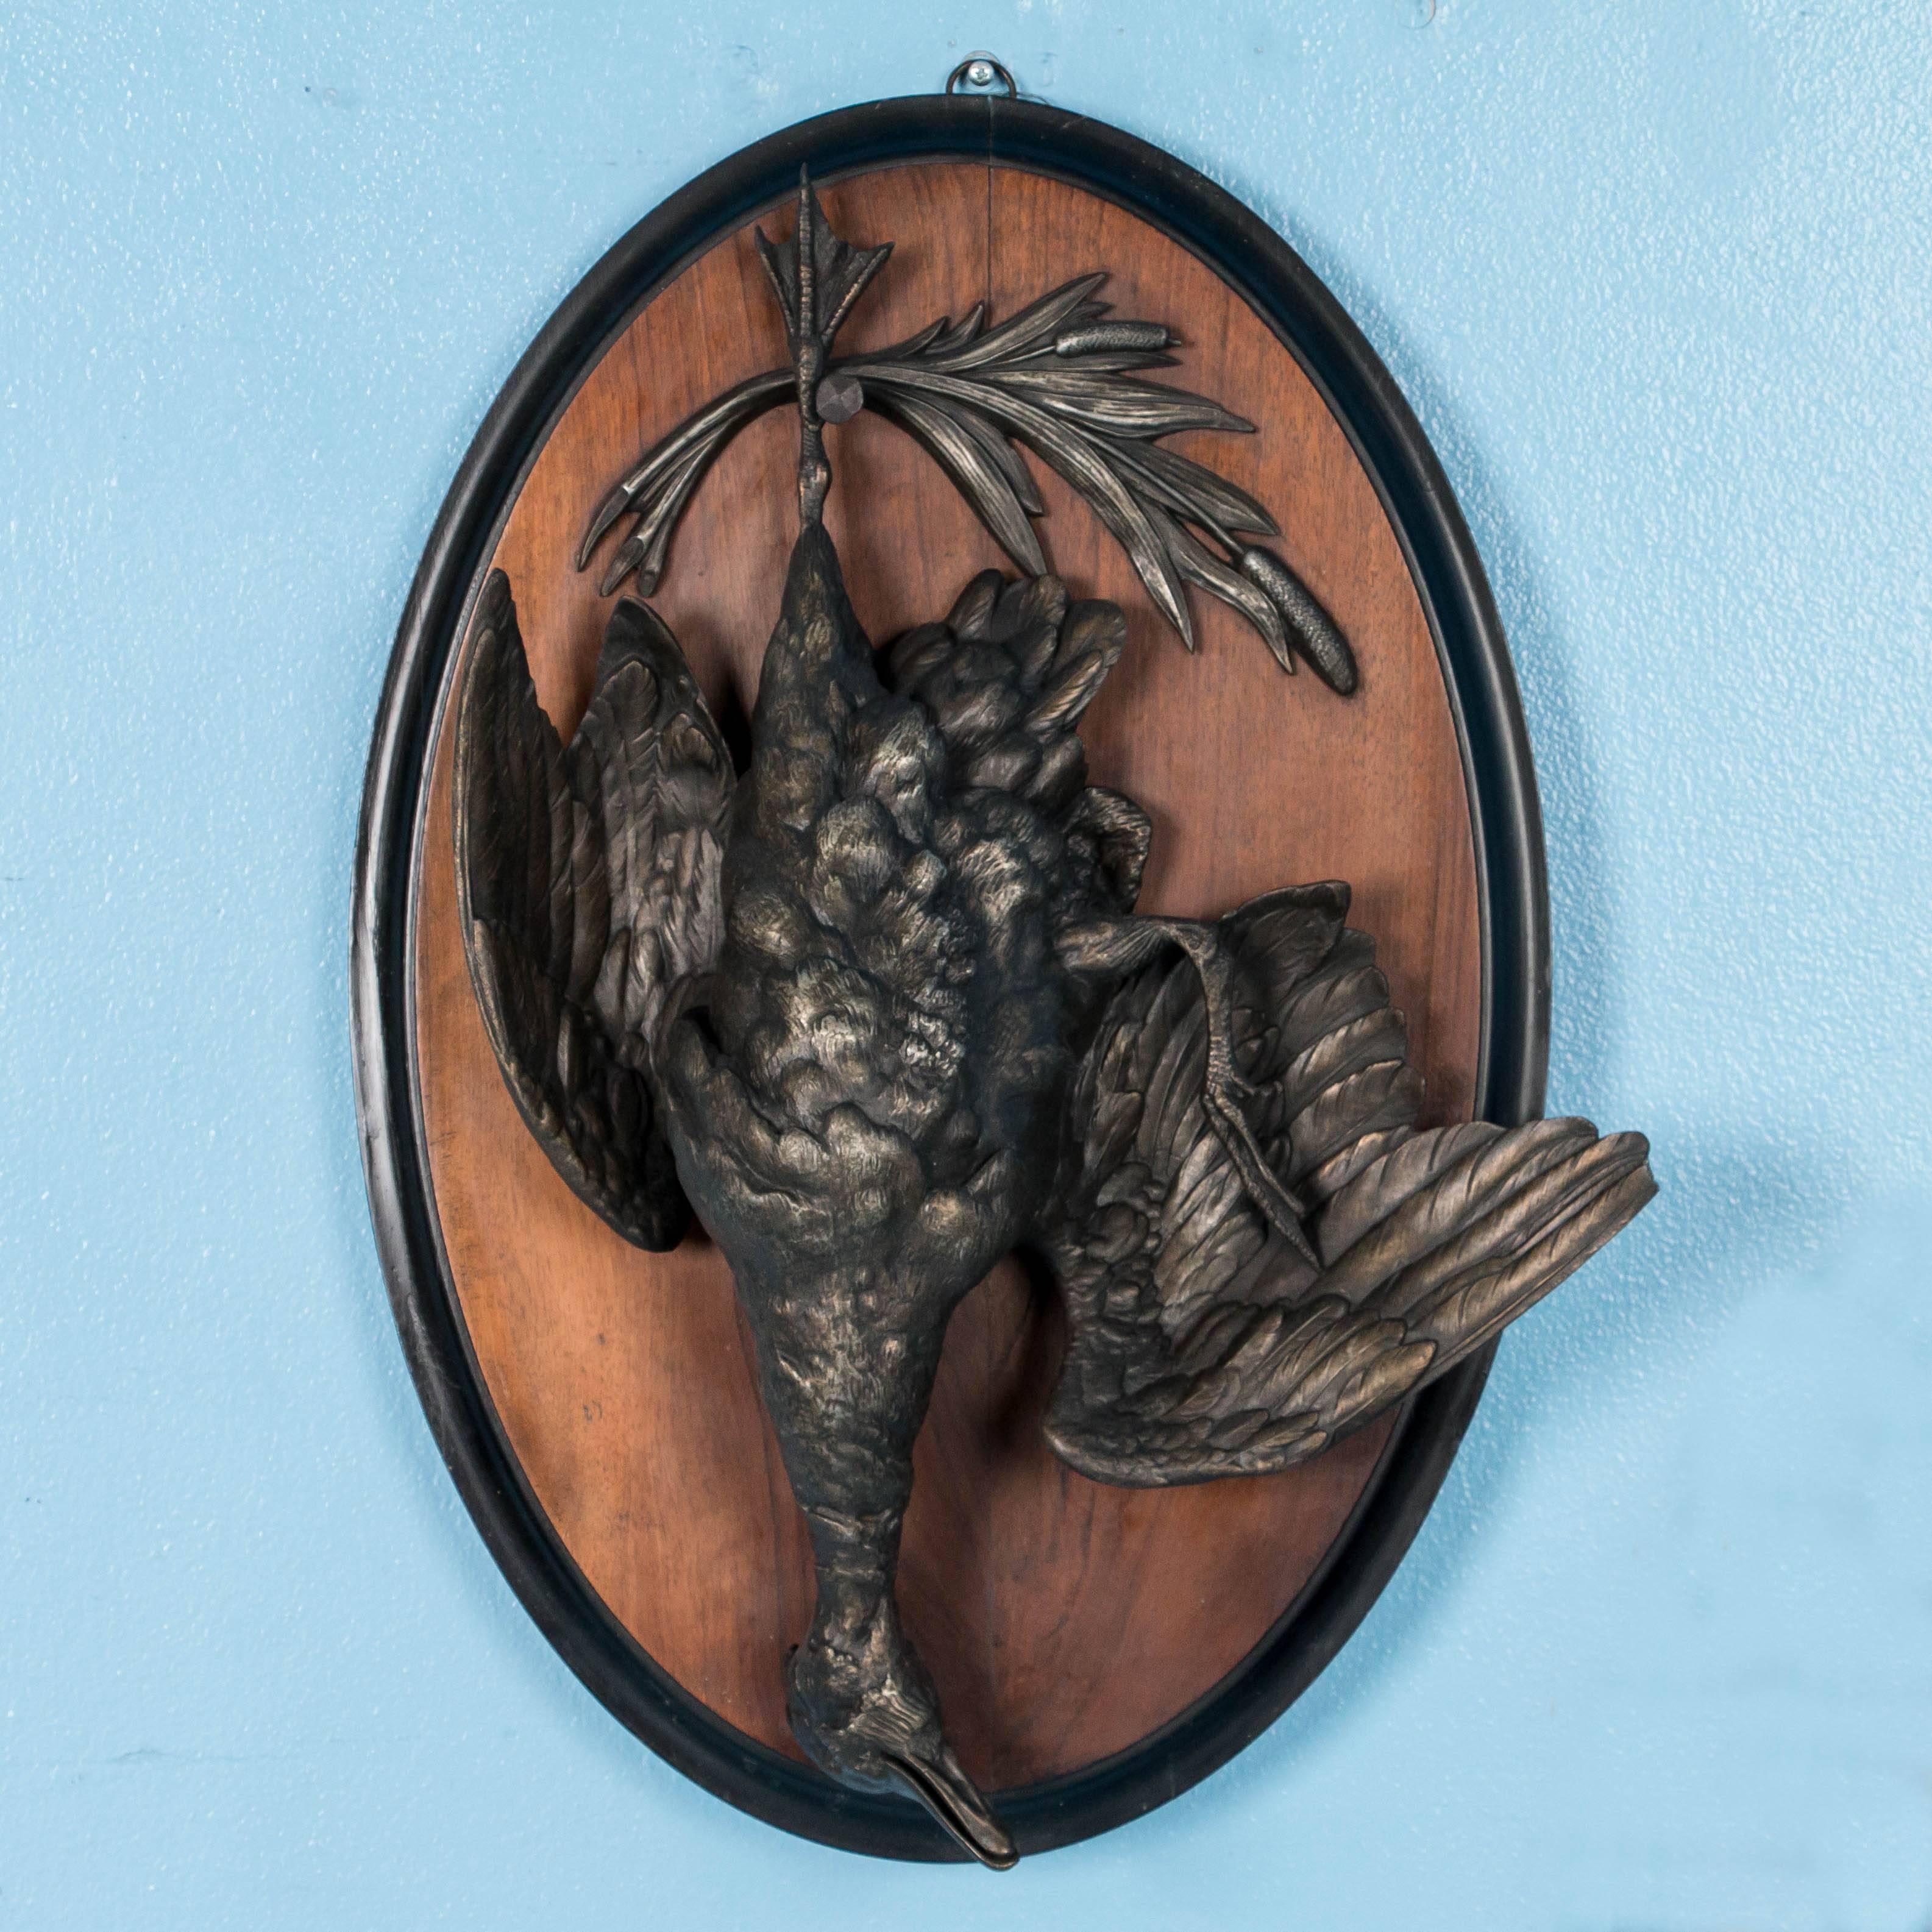 The amazing attention to detail is what first grabs your attention along with the large-scale of these two game birds, one a pheasant and the other a duck. The metal is a bronze patinated pot metal which is slightly worn highlighting the feathers of